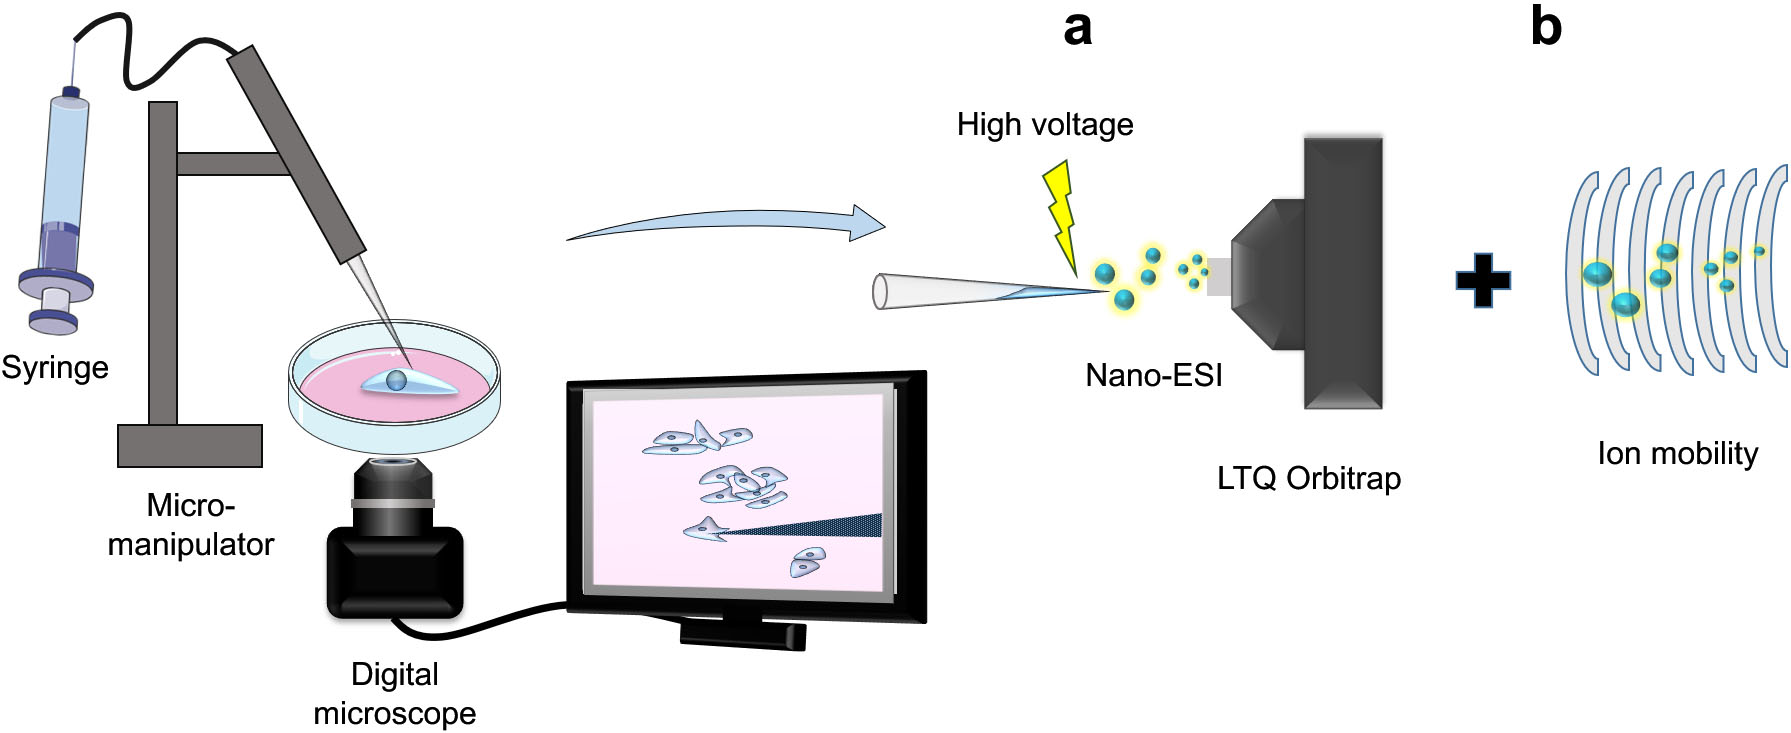 Working principle of Live-Single-Cell Mass Spectrometry platform (LSC-MS). Single cells or their contents are first sampled using pulled glass capillaries under microscopic observation and are then directly nanosprayed for subsequent MS measurements (a). Incorporation of ion mobility setup can improve the analysis resolution (b).